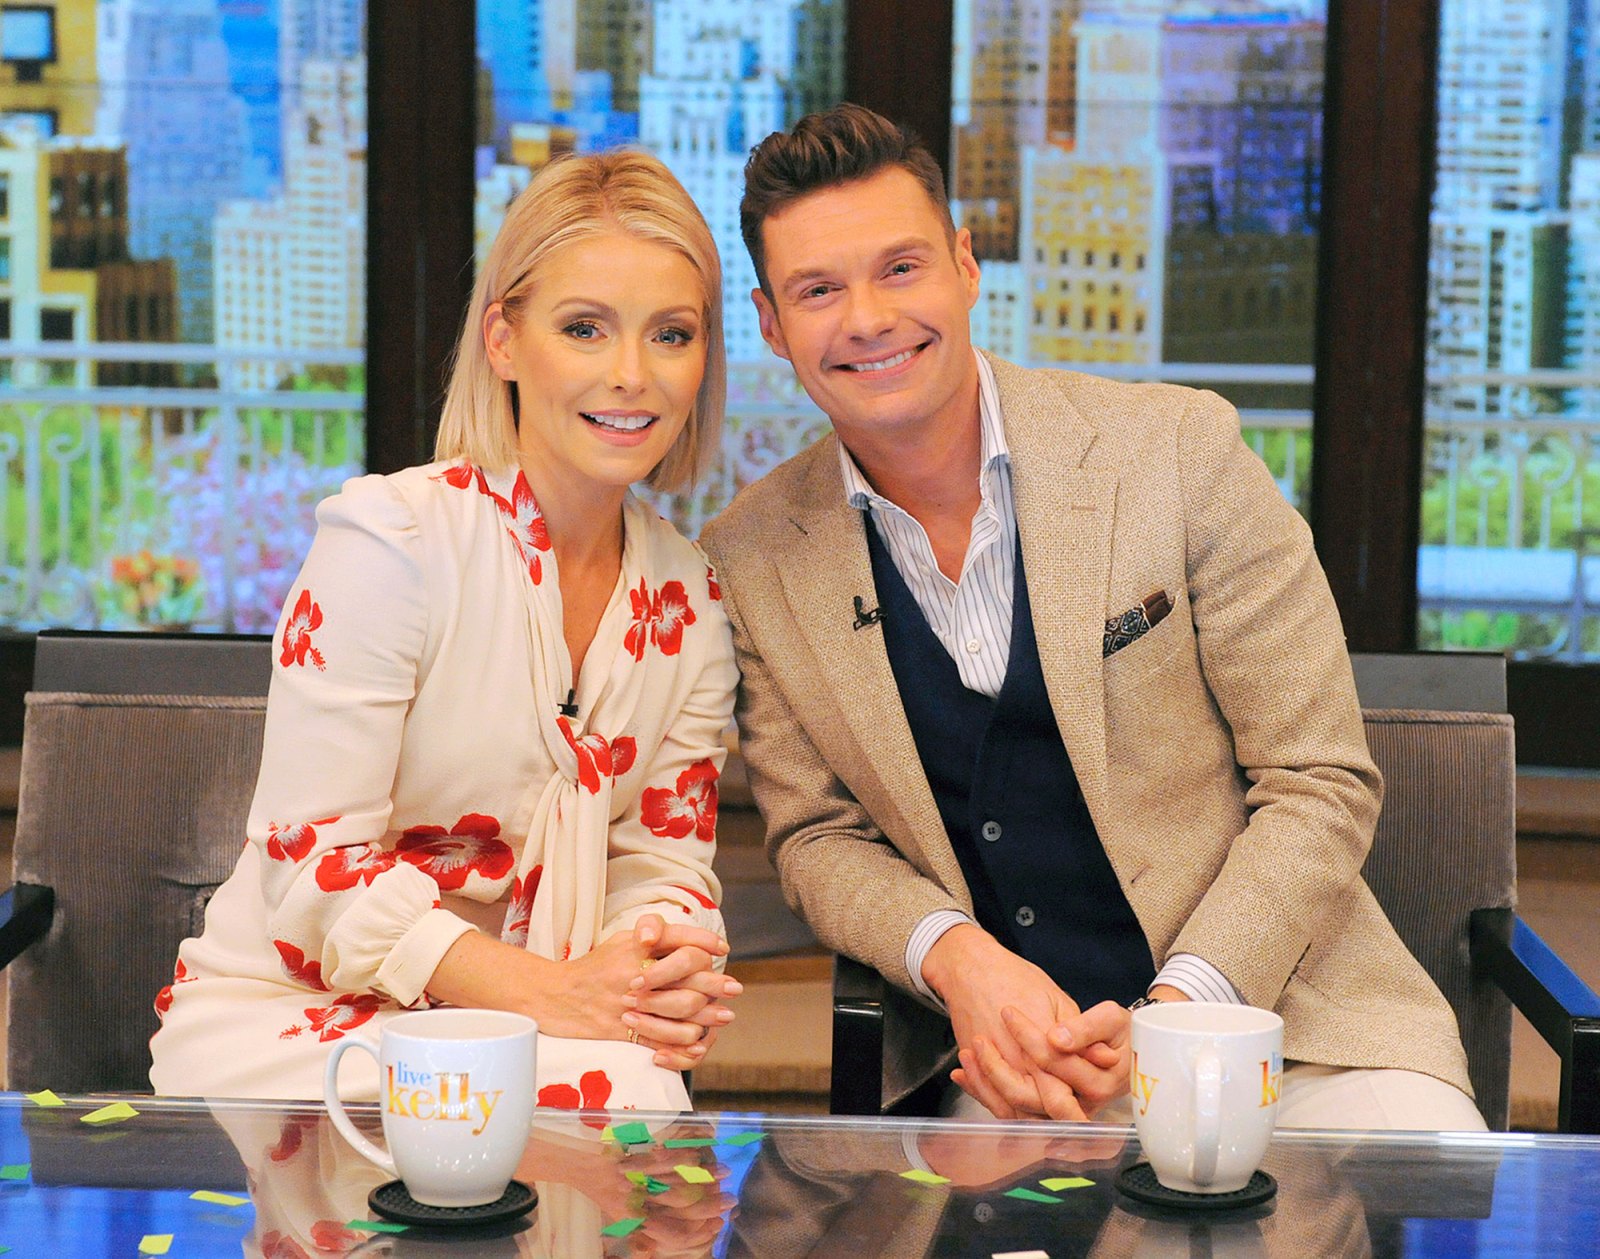 Feature Ryan Seacrest and Kelly Ripa Friendship Through the Years